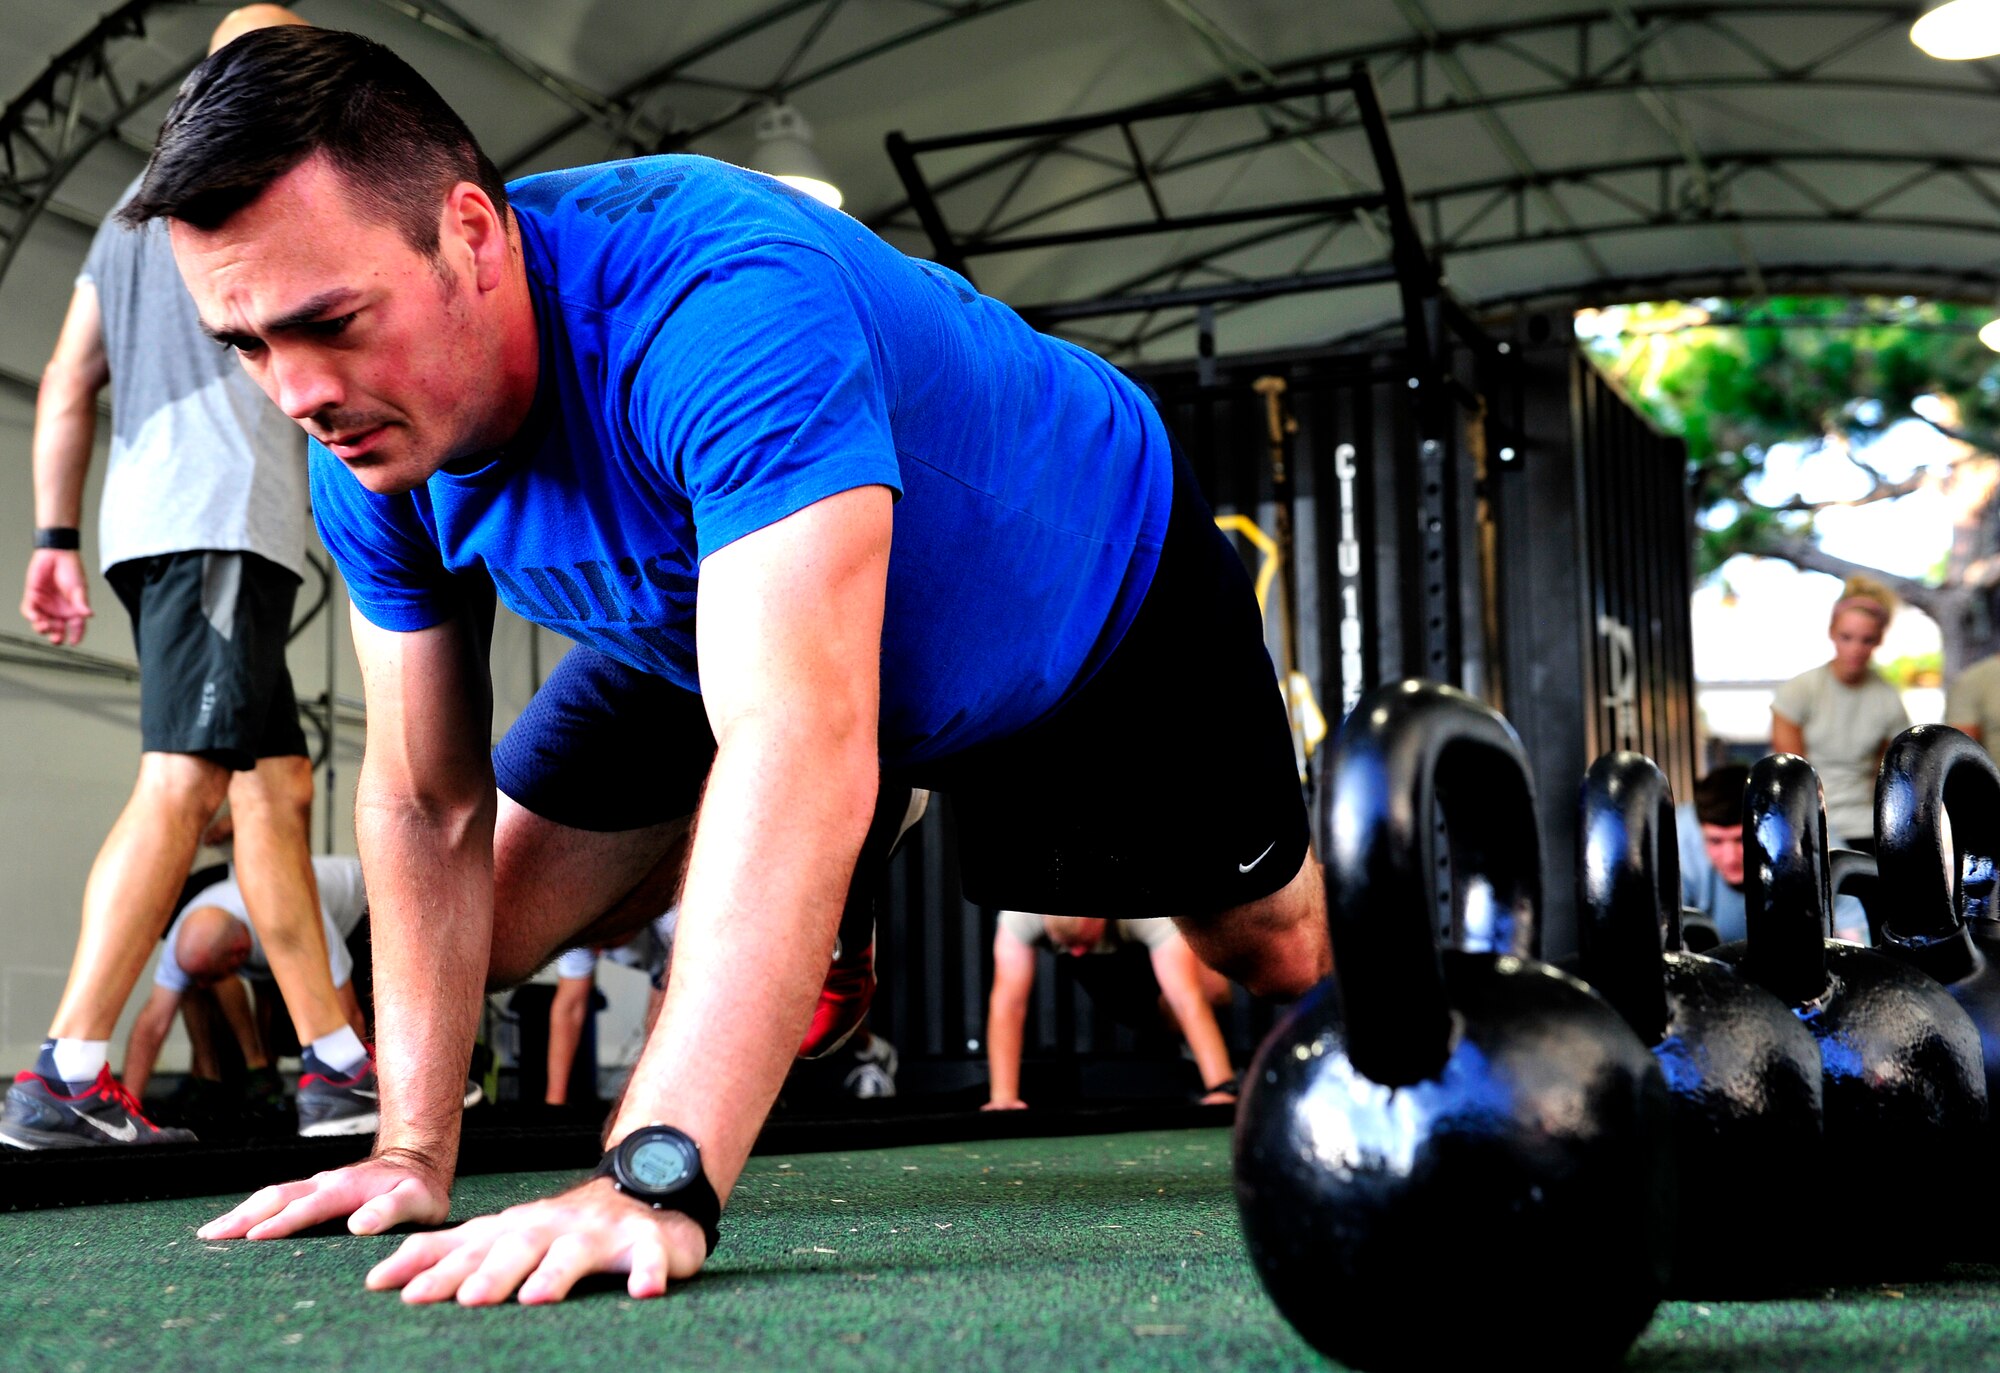 Tech. Sgt. Michael Dylan, 18th Flight Test Squadron, warms up for a functional fitness class at the Aderholt Fitness Center, Hurlburt Field, Fla., Aug. 22, 2014. Fitness instructors taught Airmen to use functional movements to maximize their strength. (U.S. Air Force photo/Staff Sgt. Tyler Placie)